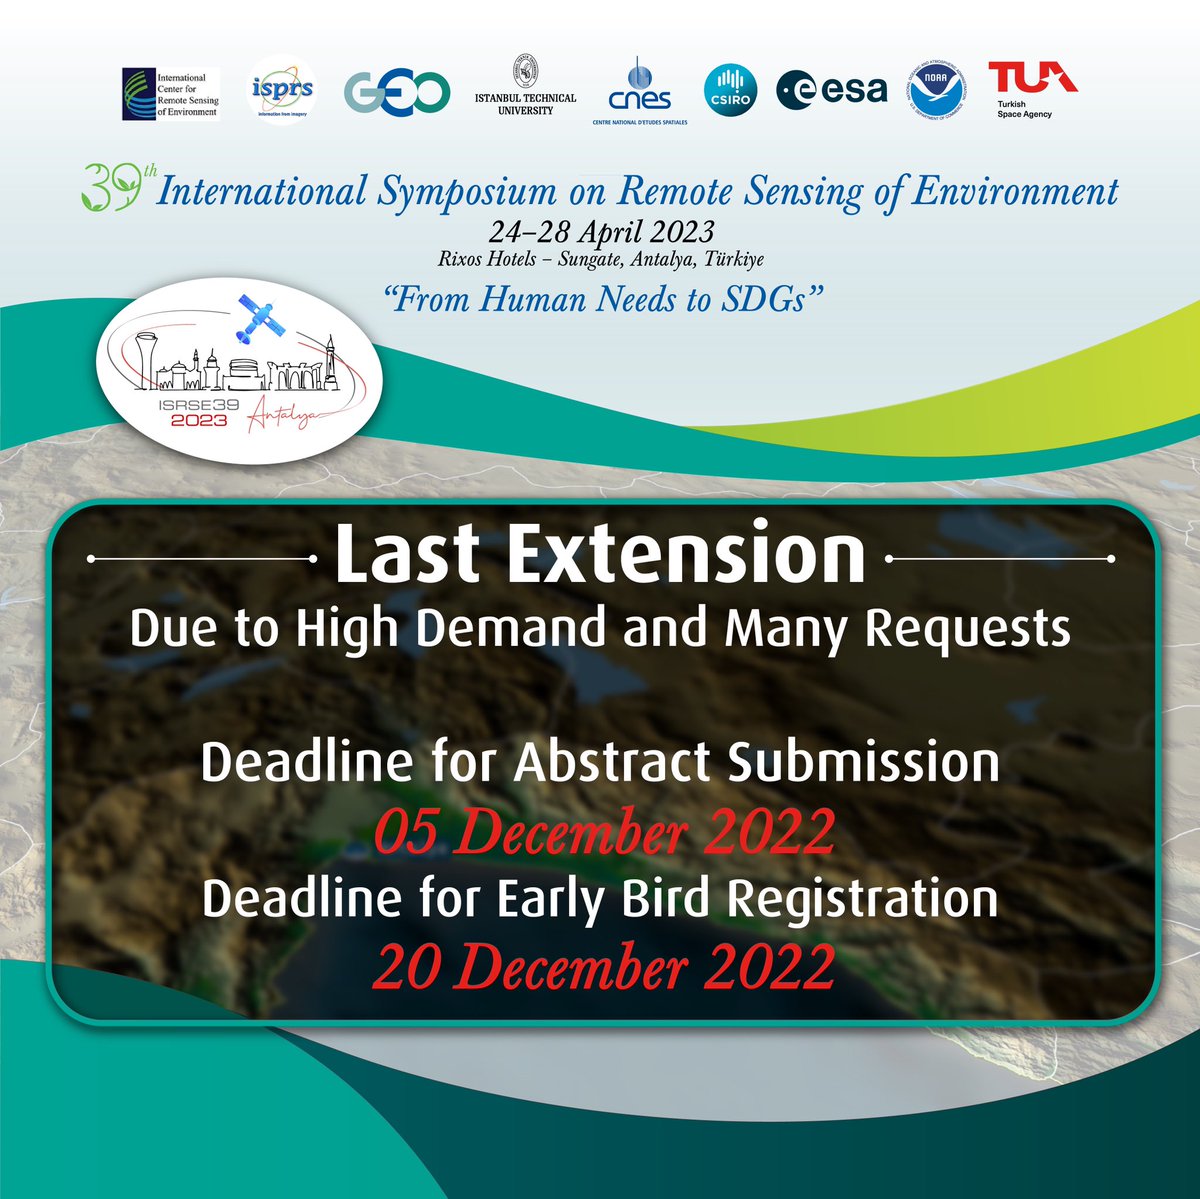 Last Extension Due to High Demand and Many Requests #isrse39 #internationalsymposiumonremotesensingofenvironment